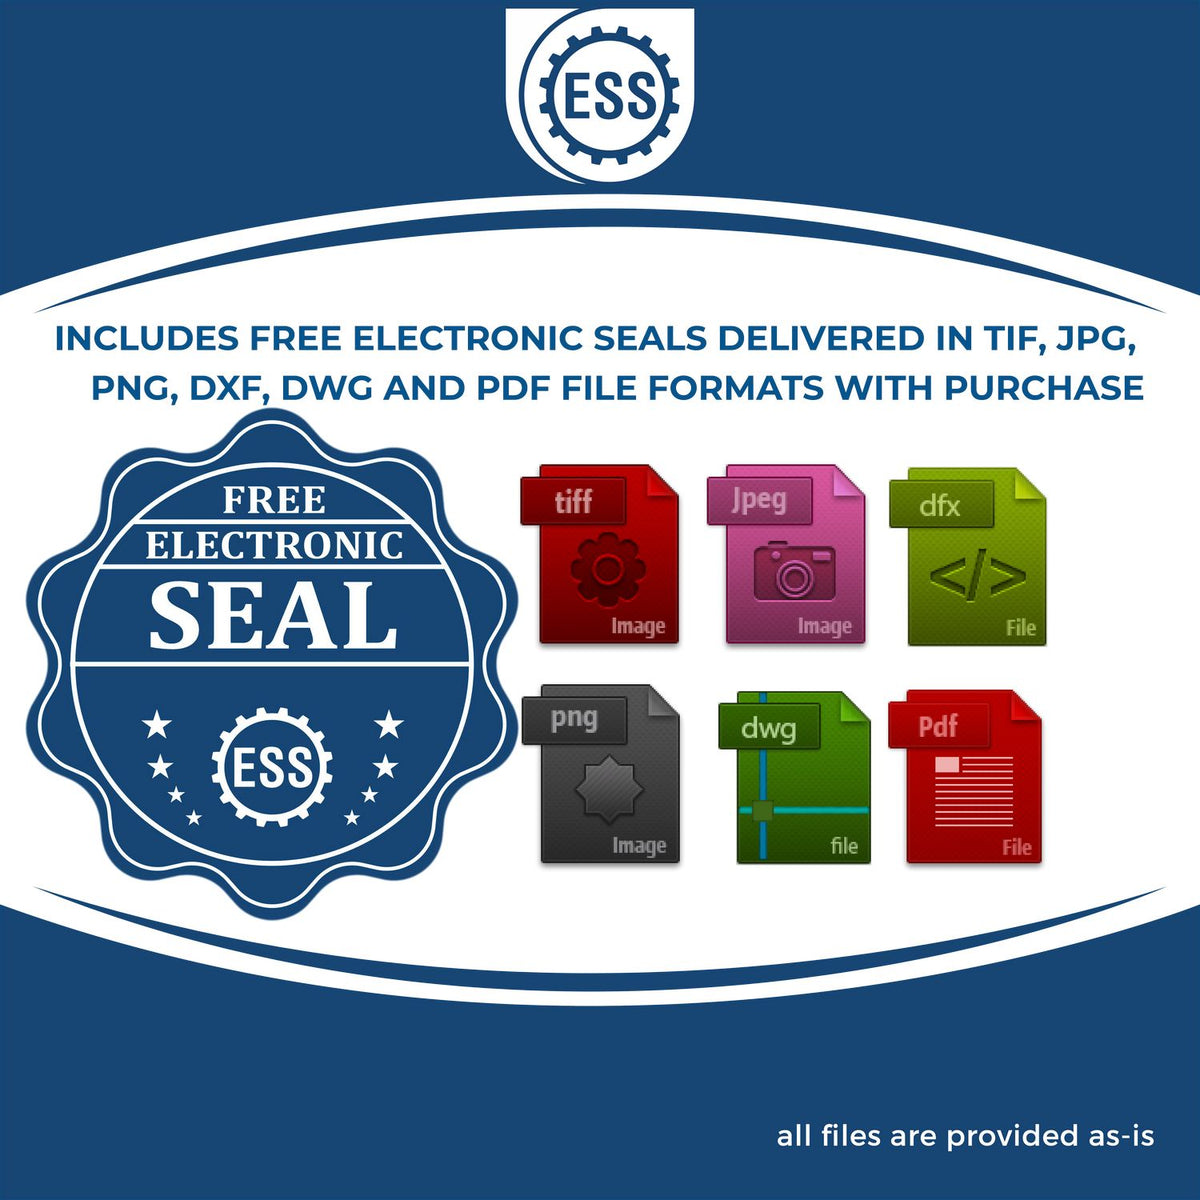 An infographic for the free electronic seal for the Gift Nebraska Geologist Seal illustrating the different file type icons such as DXF, DWG, TIF, JPG and PNG.